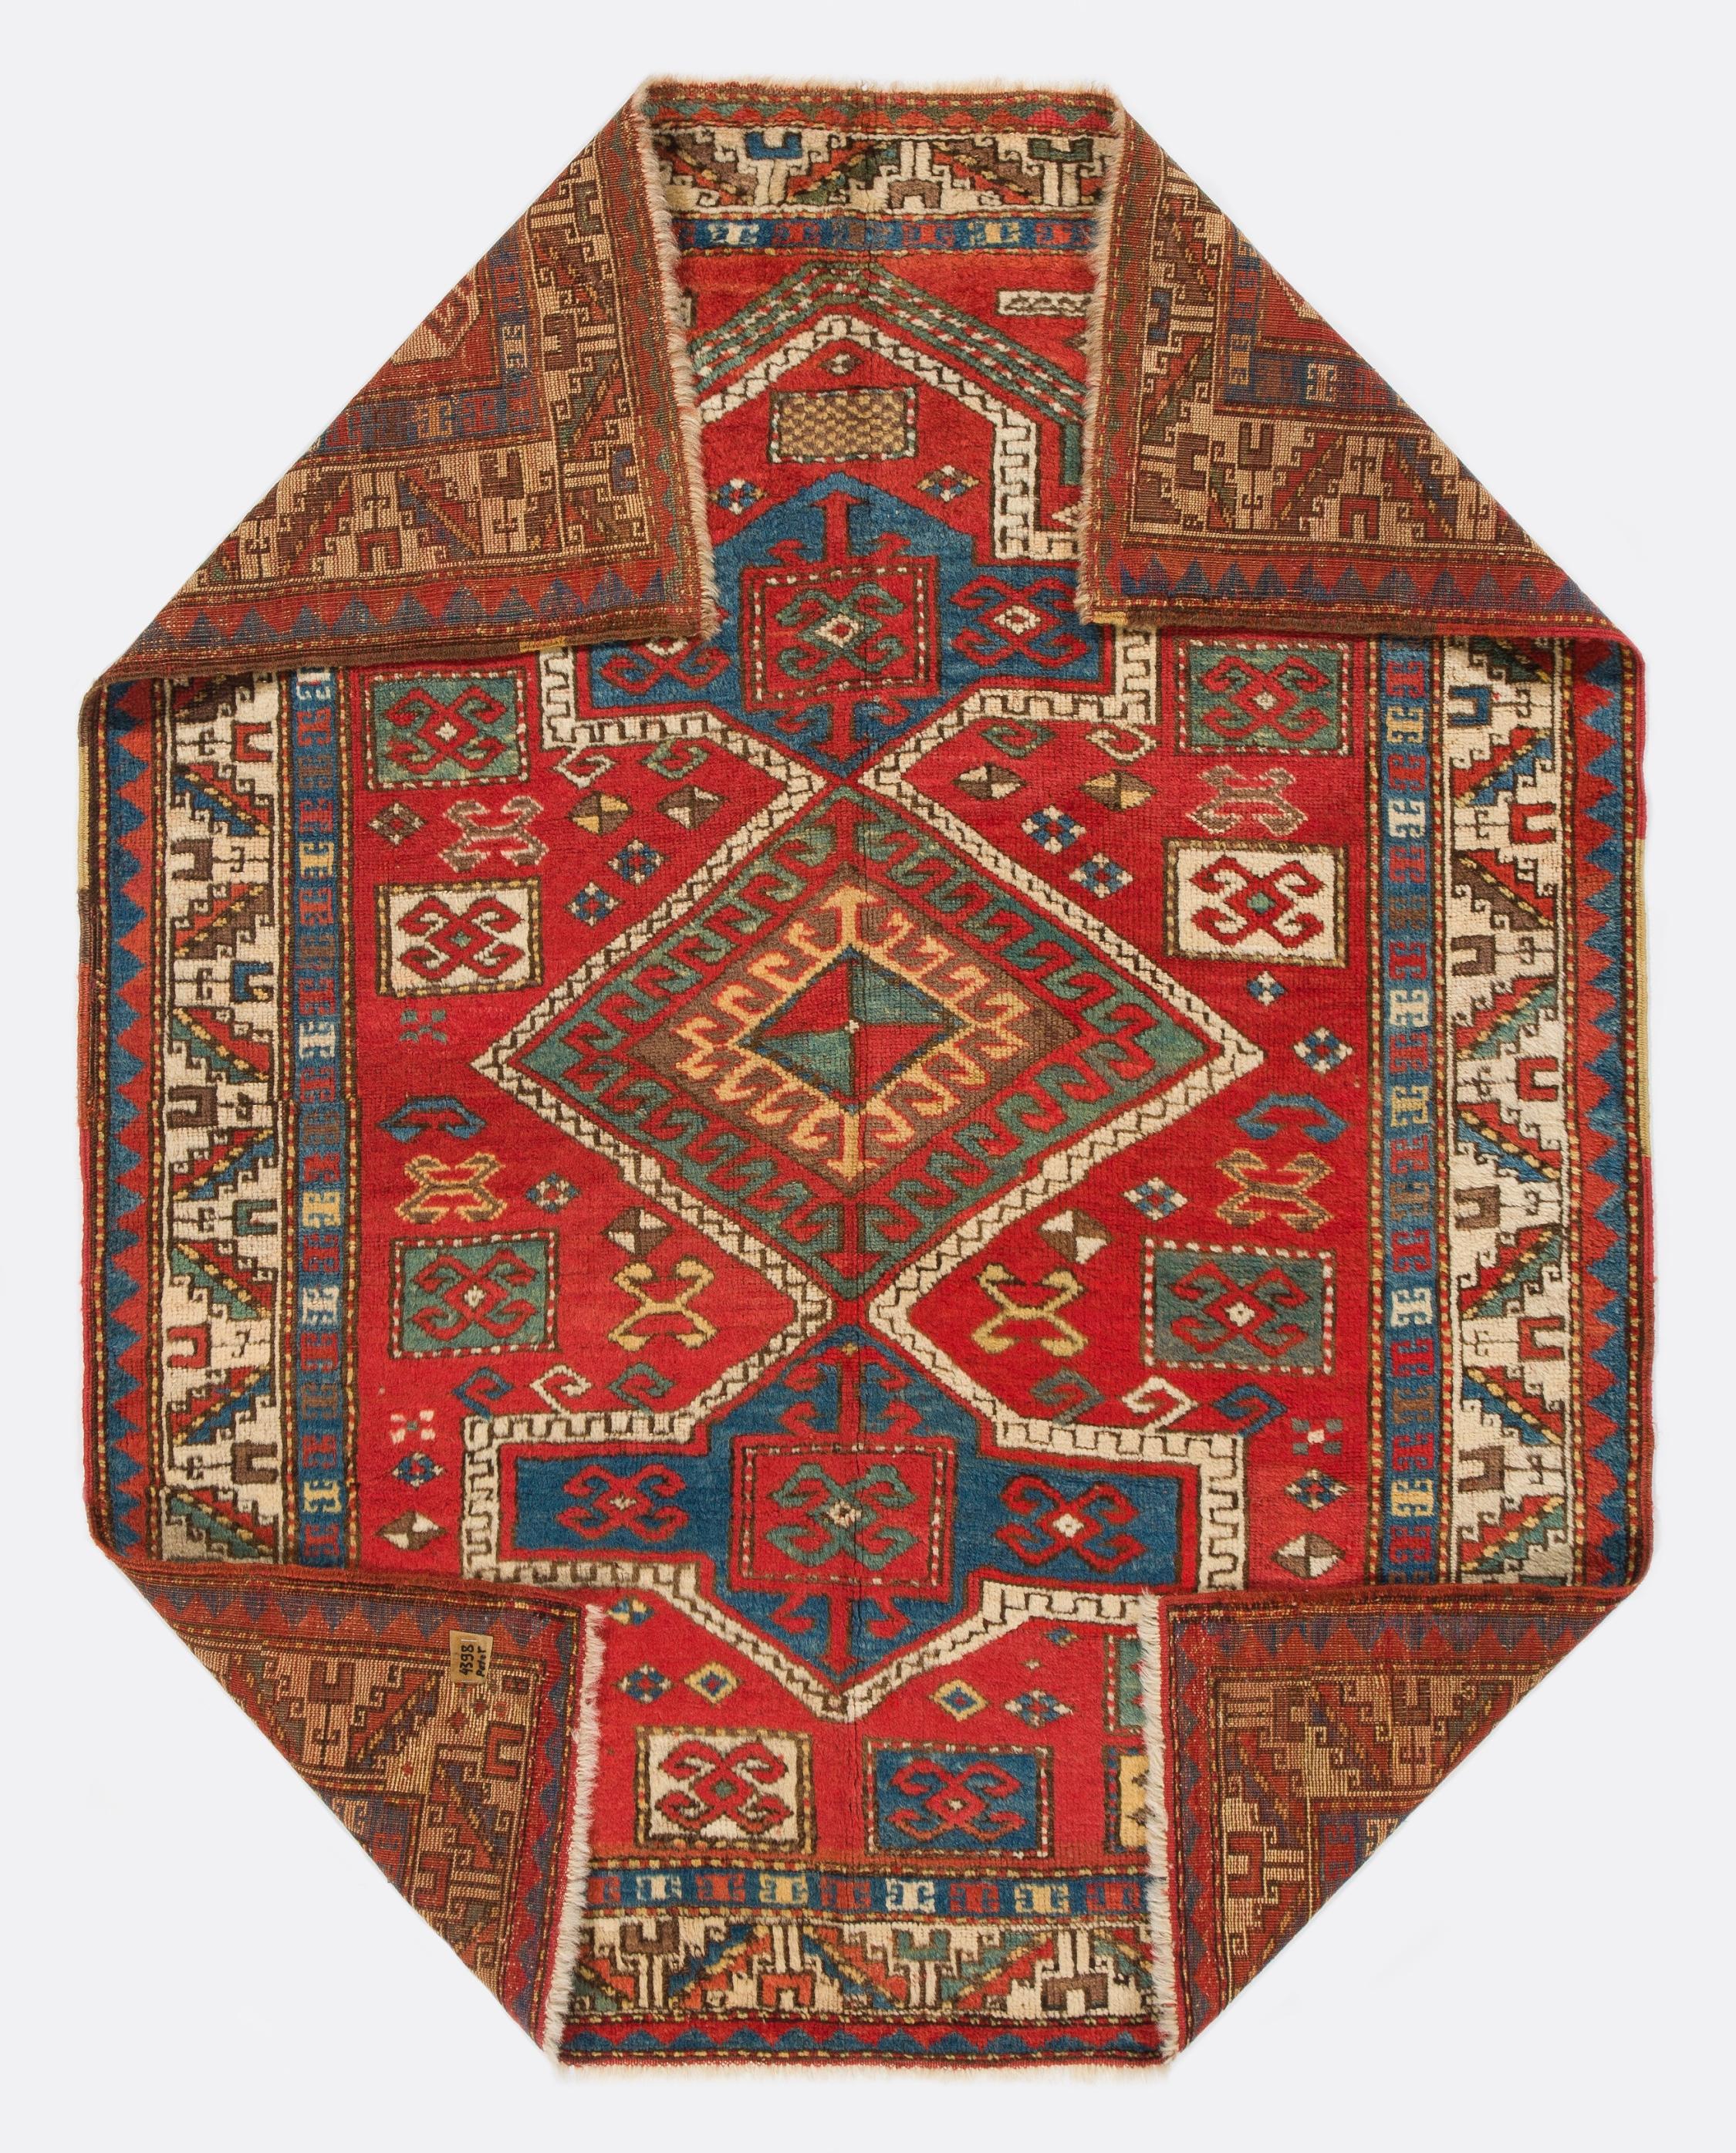 An antique Caucasian Fachralo Kazak Prayer rug. Finely hand-knotted with even medium wool pile on wool foundation. Very good condition. Sturdy and as clean as a brand new rug (deep washed professionally). Measures: 3.8 x 4.8 ft.